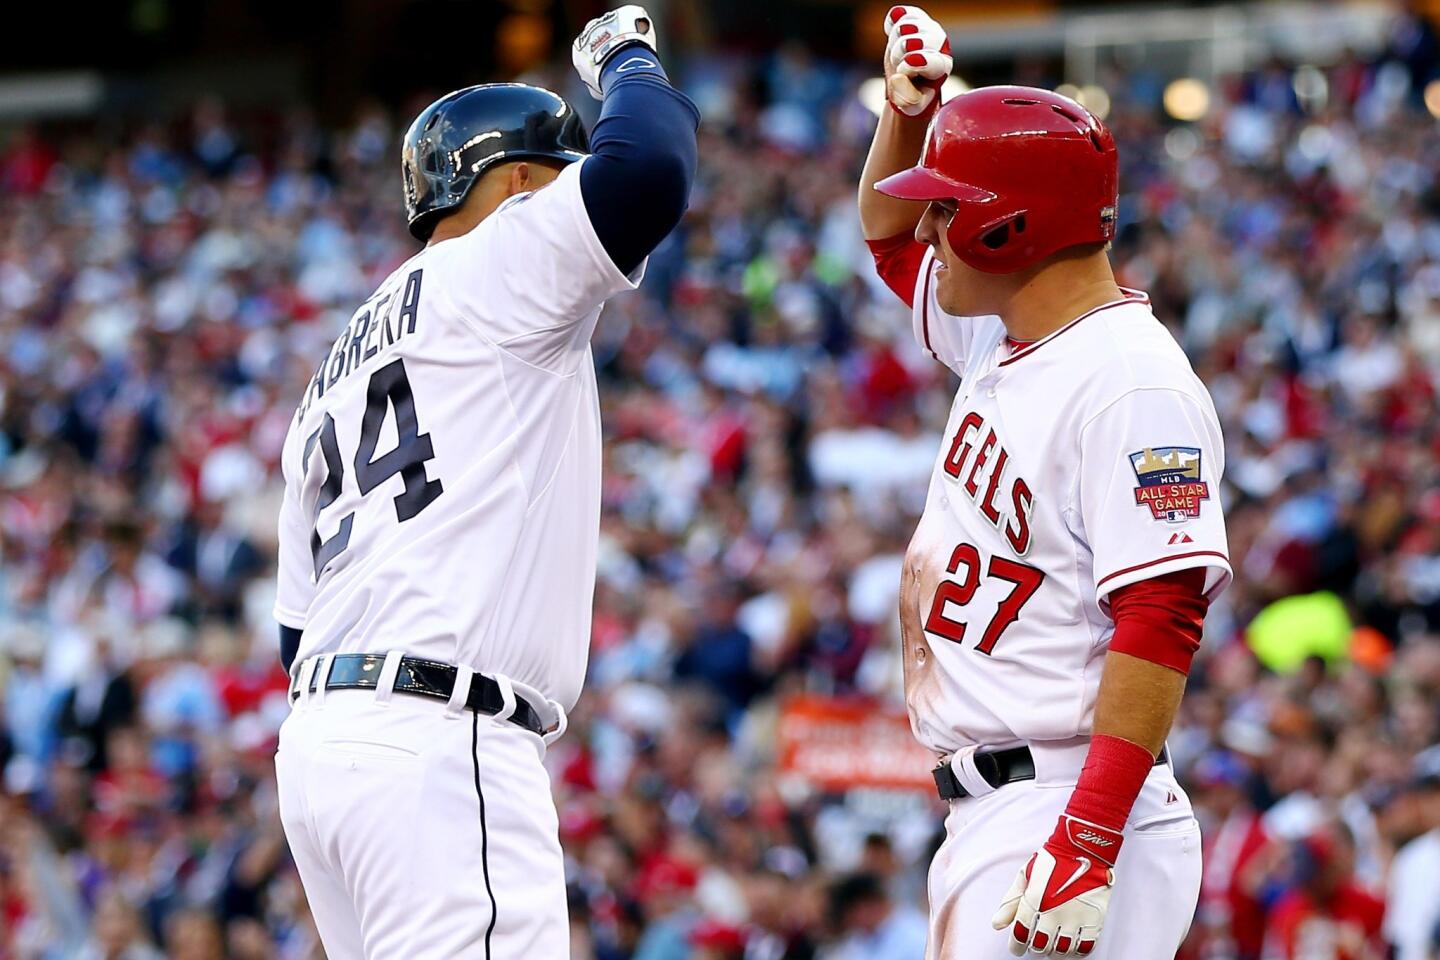 Mike Trout named All-Star Game MVP as AL beats NL, 5-3 - Los